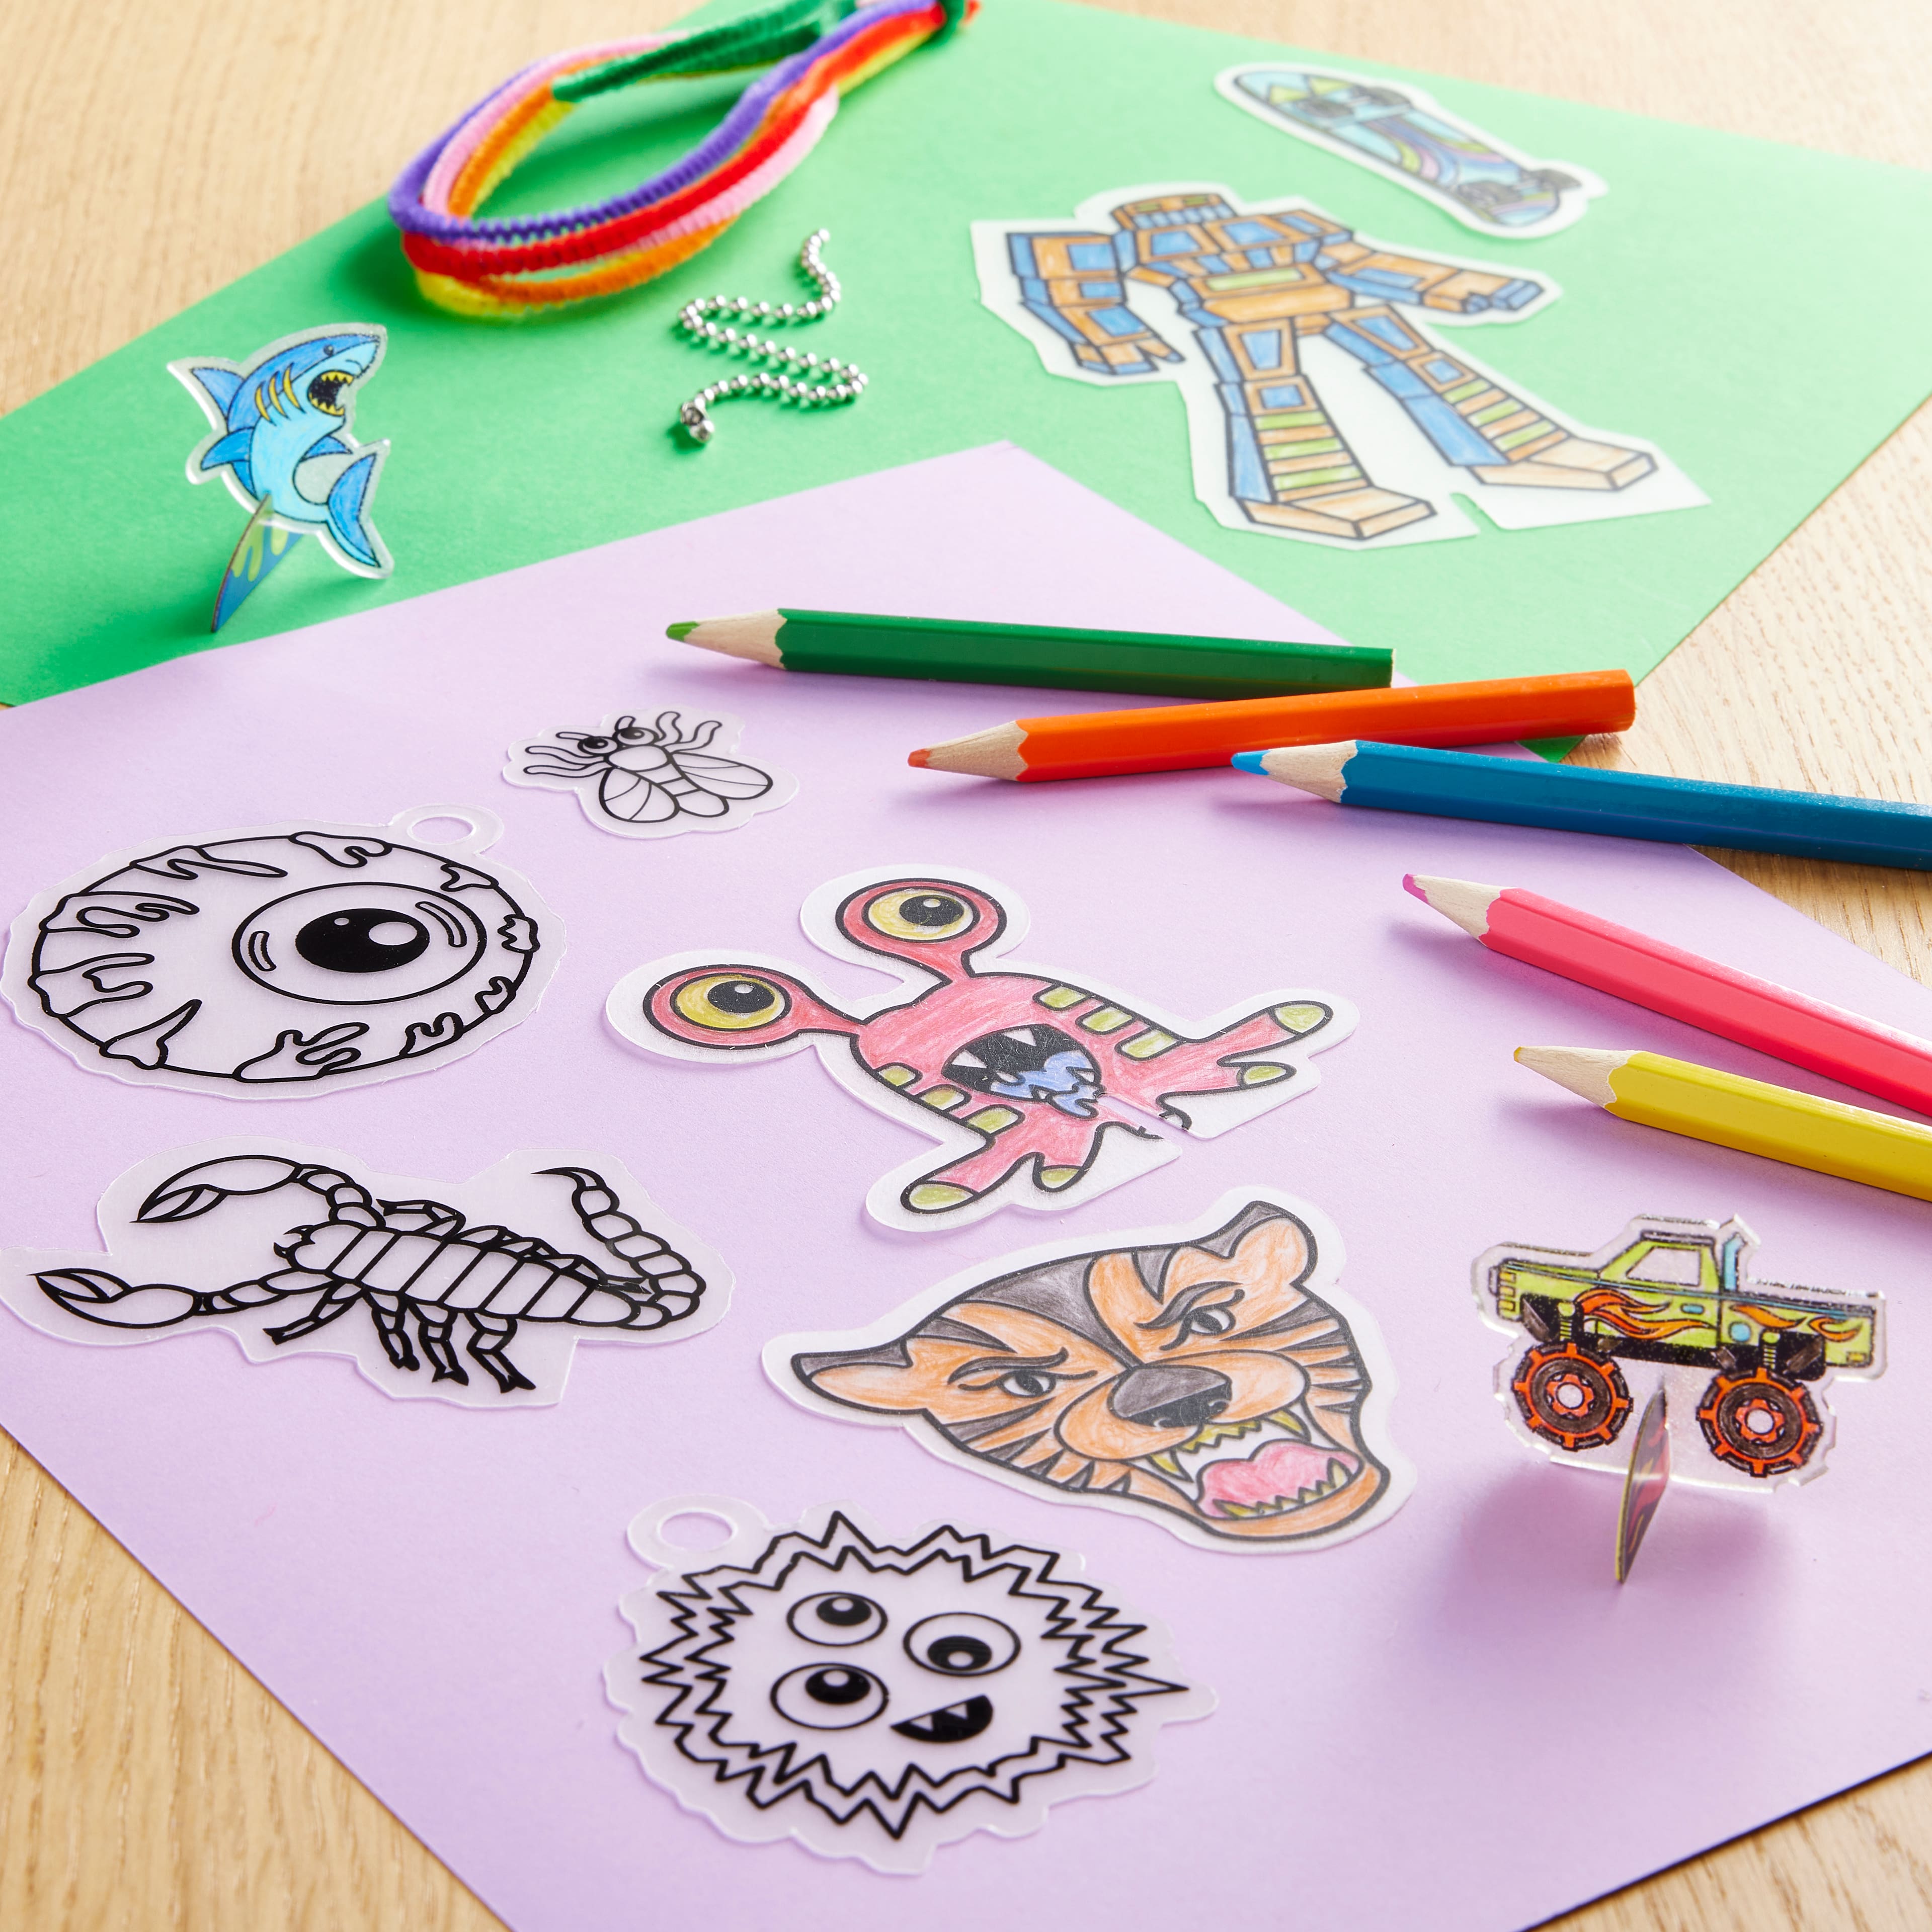 Jump into Shrinky Dinks - Arts & Crafts Activity Kit (Specialty